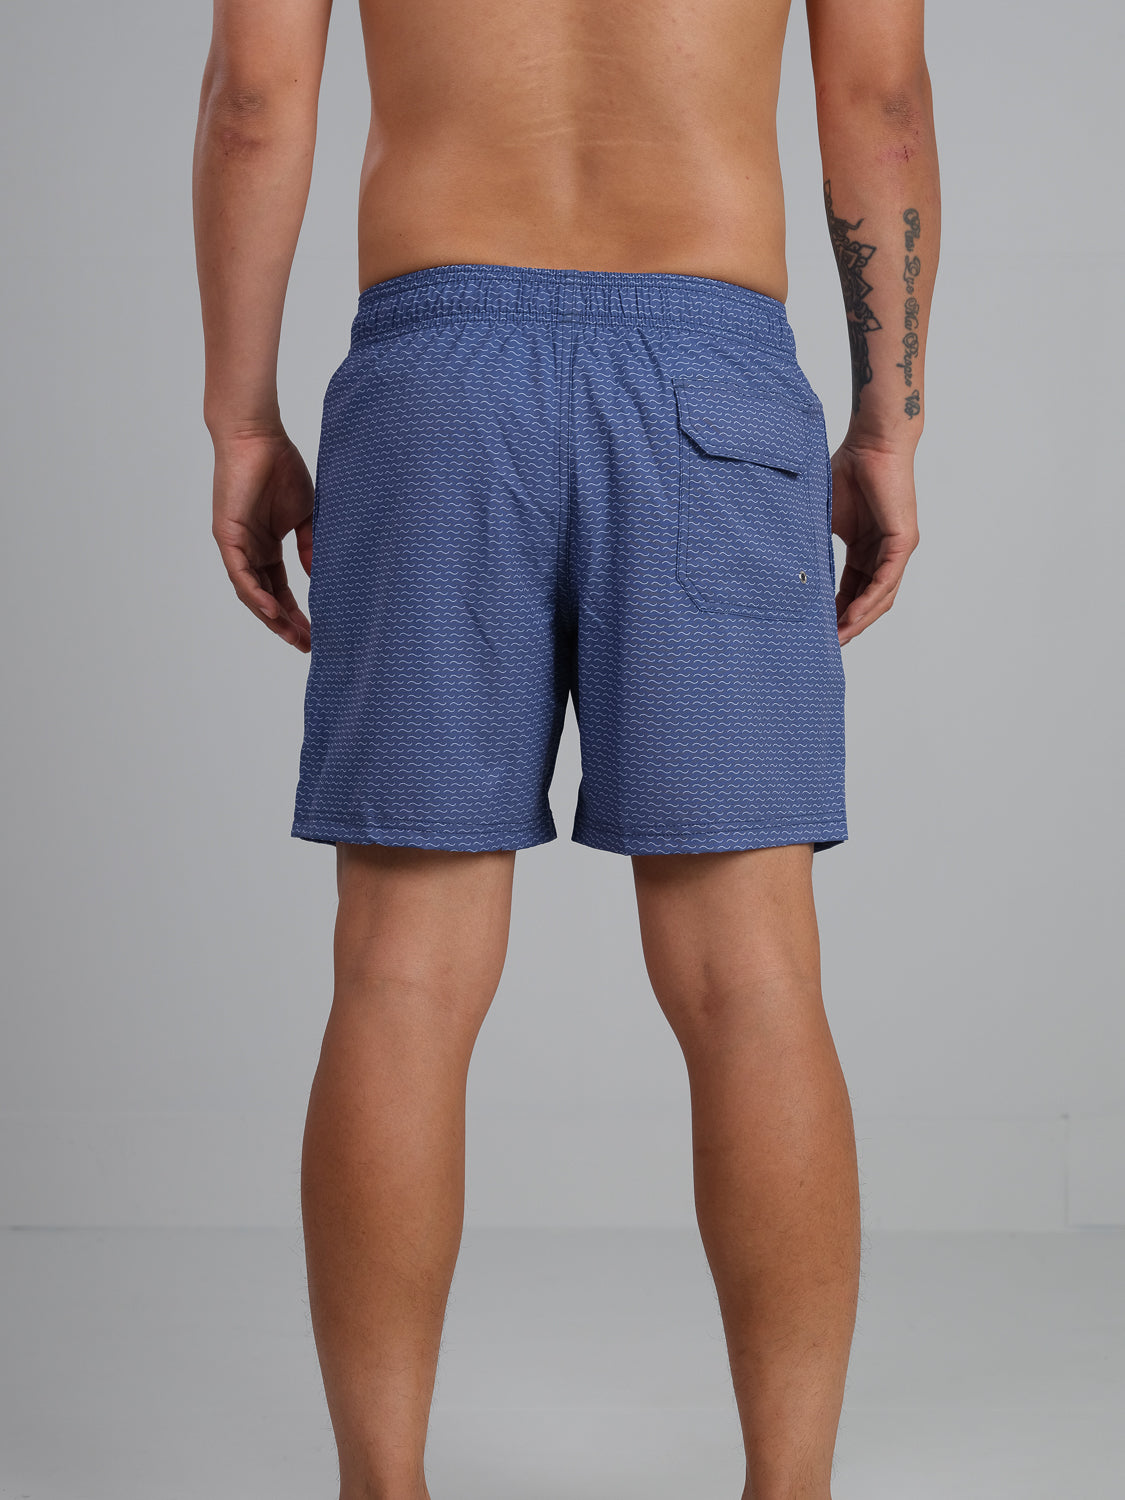 Waves Printed Waves Swim Trunk with Fast Dry and Stretch